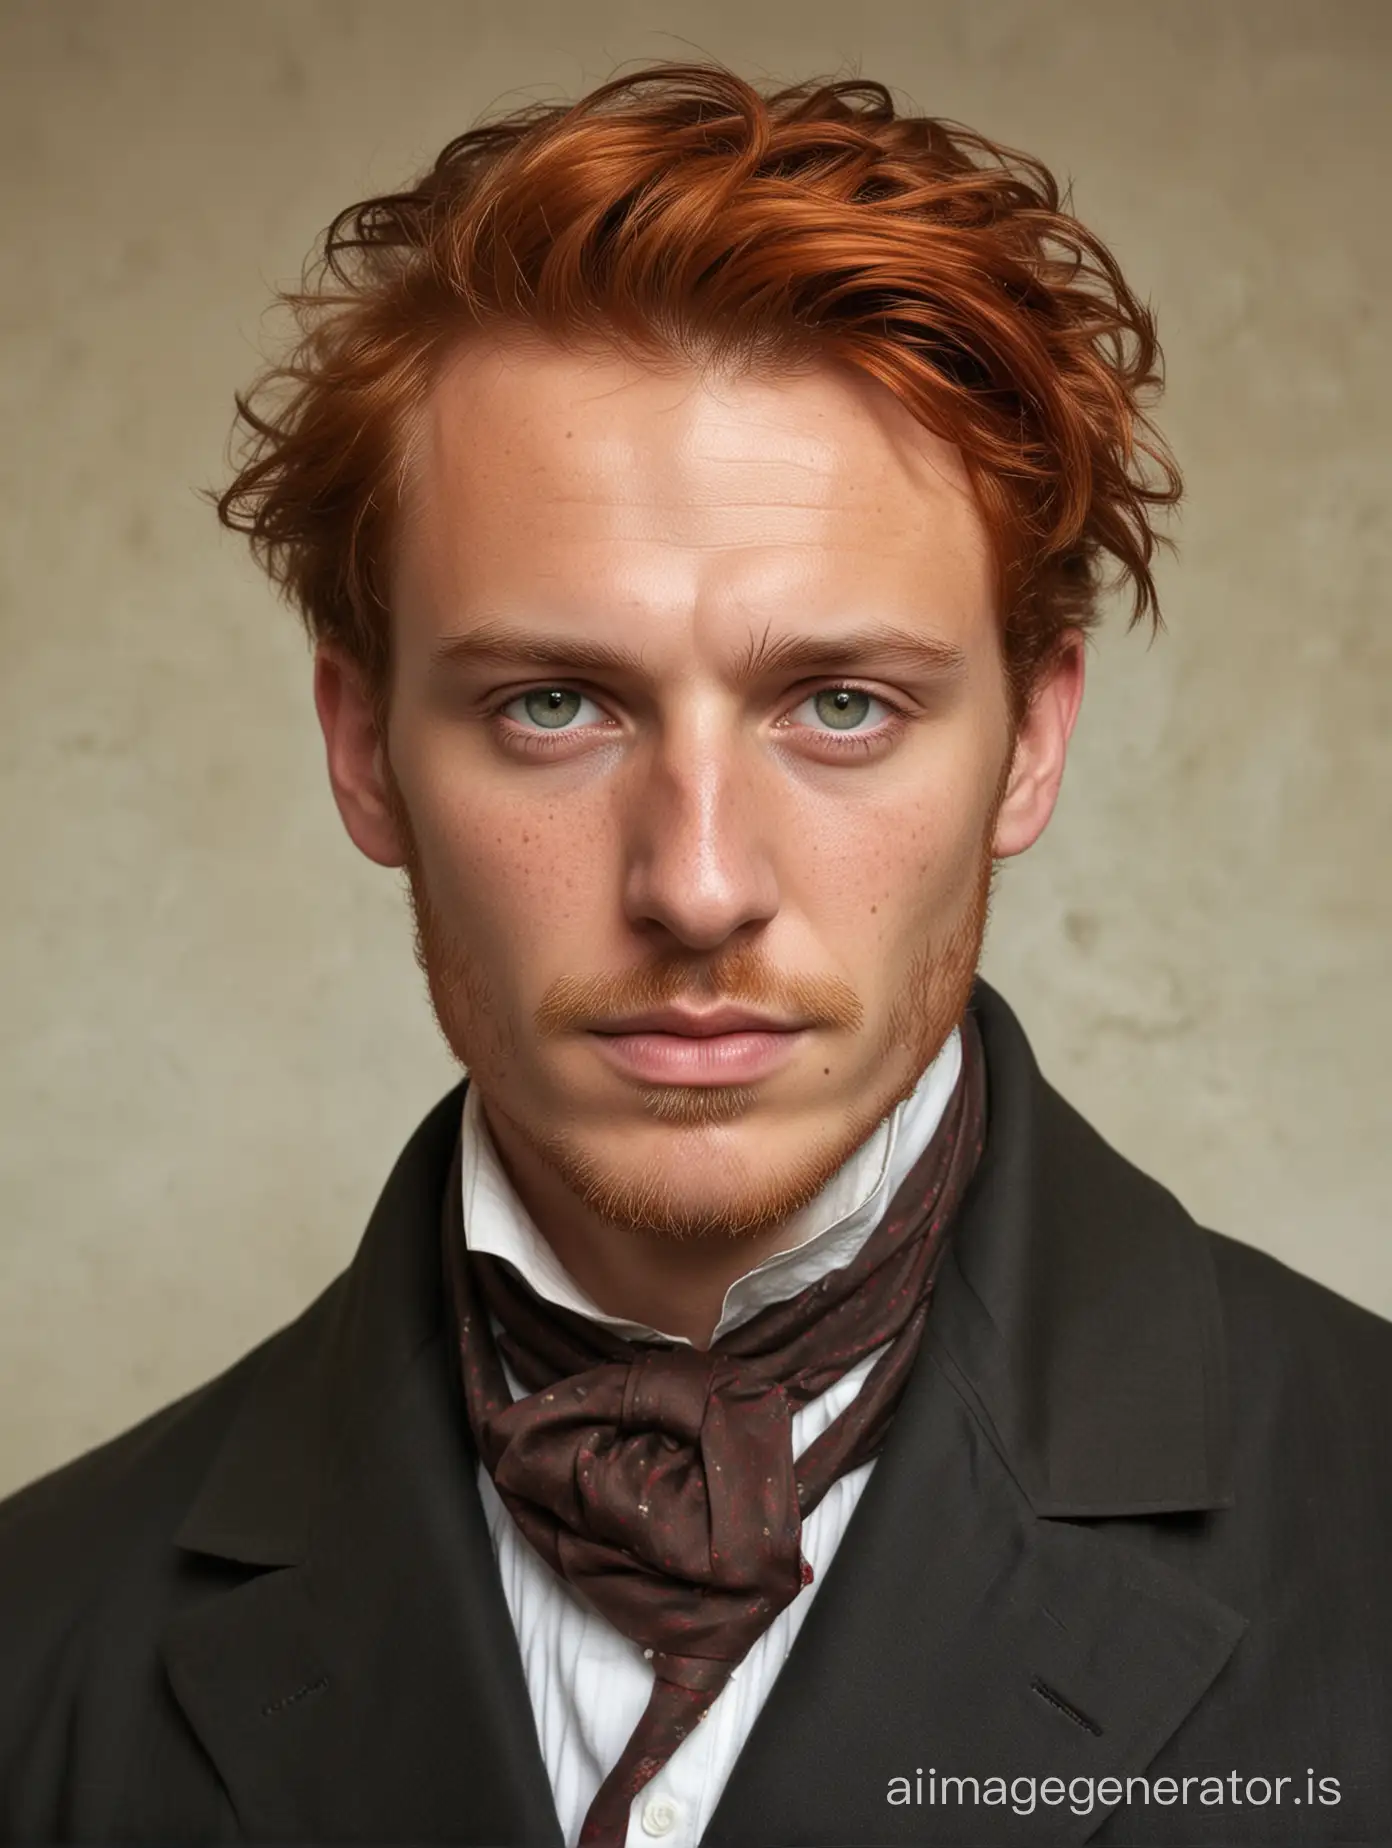 A man with fiery red hair, styled in a classic 19th-century fashion. His hair might be slightly tousled, reflecting a rugged charm. His complexion is likely olive-toned, typical of someone from the Mediterranean region, with perhaps a hint of sun-kissed freckles across his nose and cheeks. His eyes are deep and expressive, perhaps a shade of brown, hazel or black, reflecting both warmth and intensity.

For his attire, think of traditional Neapolitan clothing from that era. He might wear a tailored suit, possibly in a rich, earthy color like brown or olive green, with a crisp white shirt underneath. A stylish cravat or ascot tied neatly at his neck adds a touch of refinement. His ensemble might be completed with polished leather shoes. He's an anarchist and freedom fighter, often had clashes with the police and state. He sports beautiful muttonchops.

The picture should resemble a 19th-century photograph.